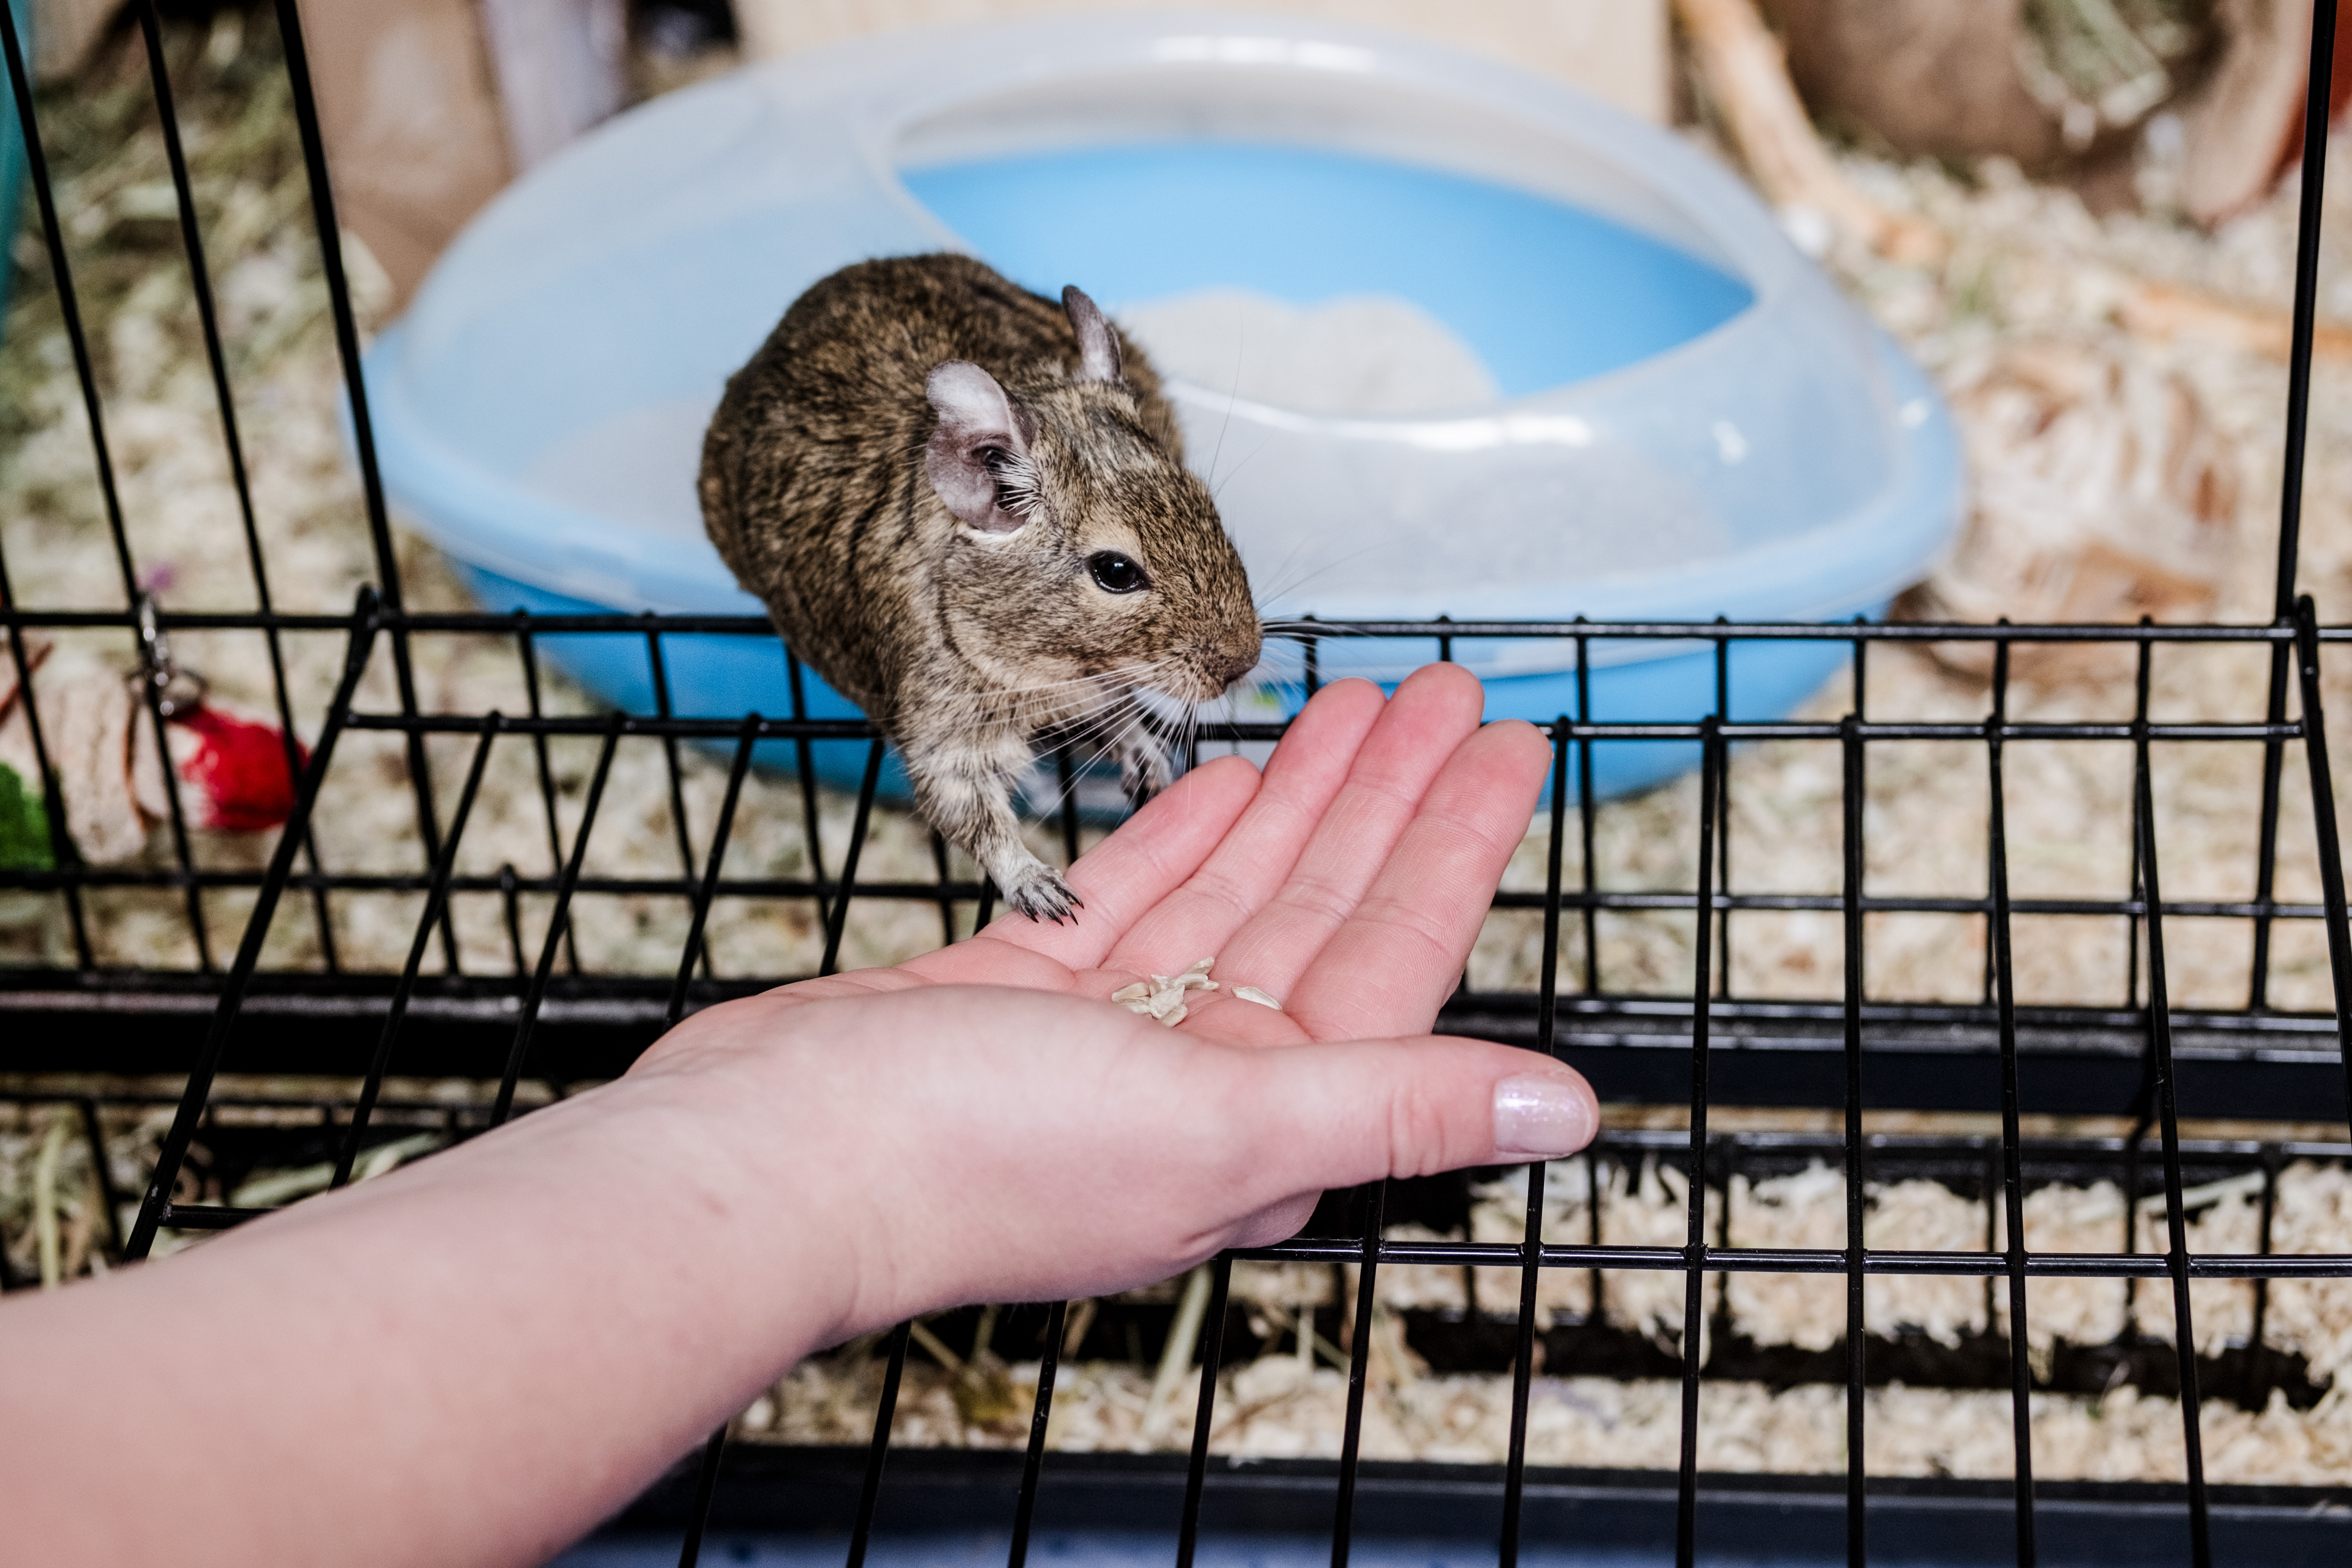 Degu coming out of its cage into a person's hand